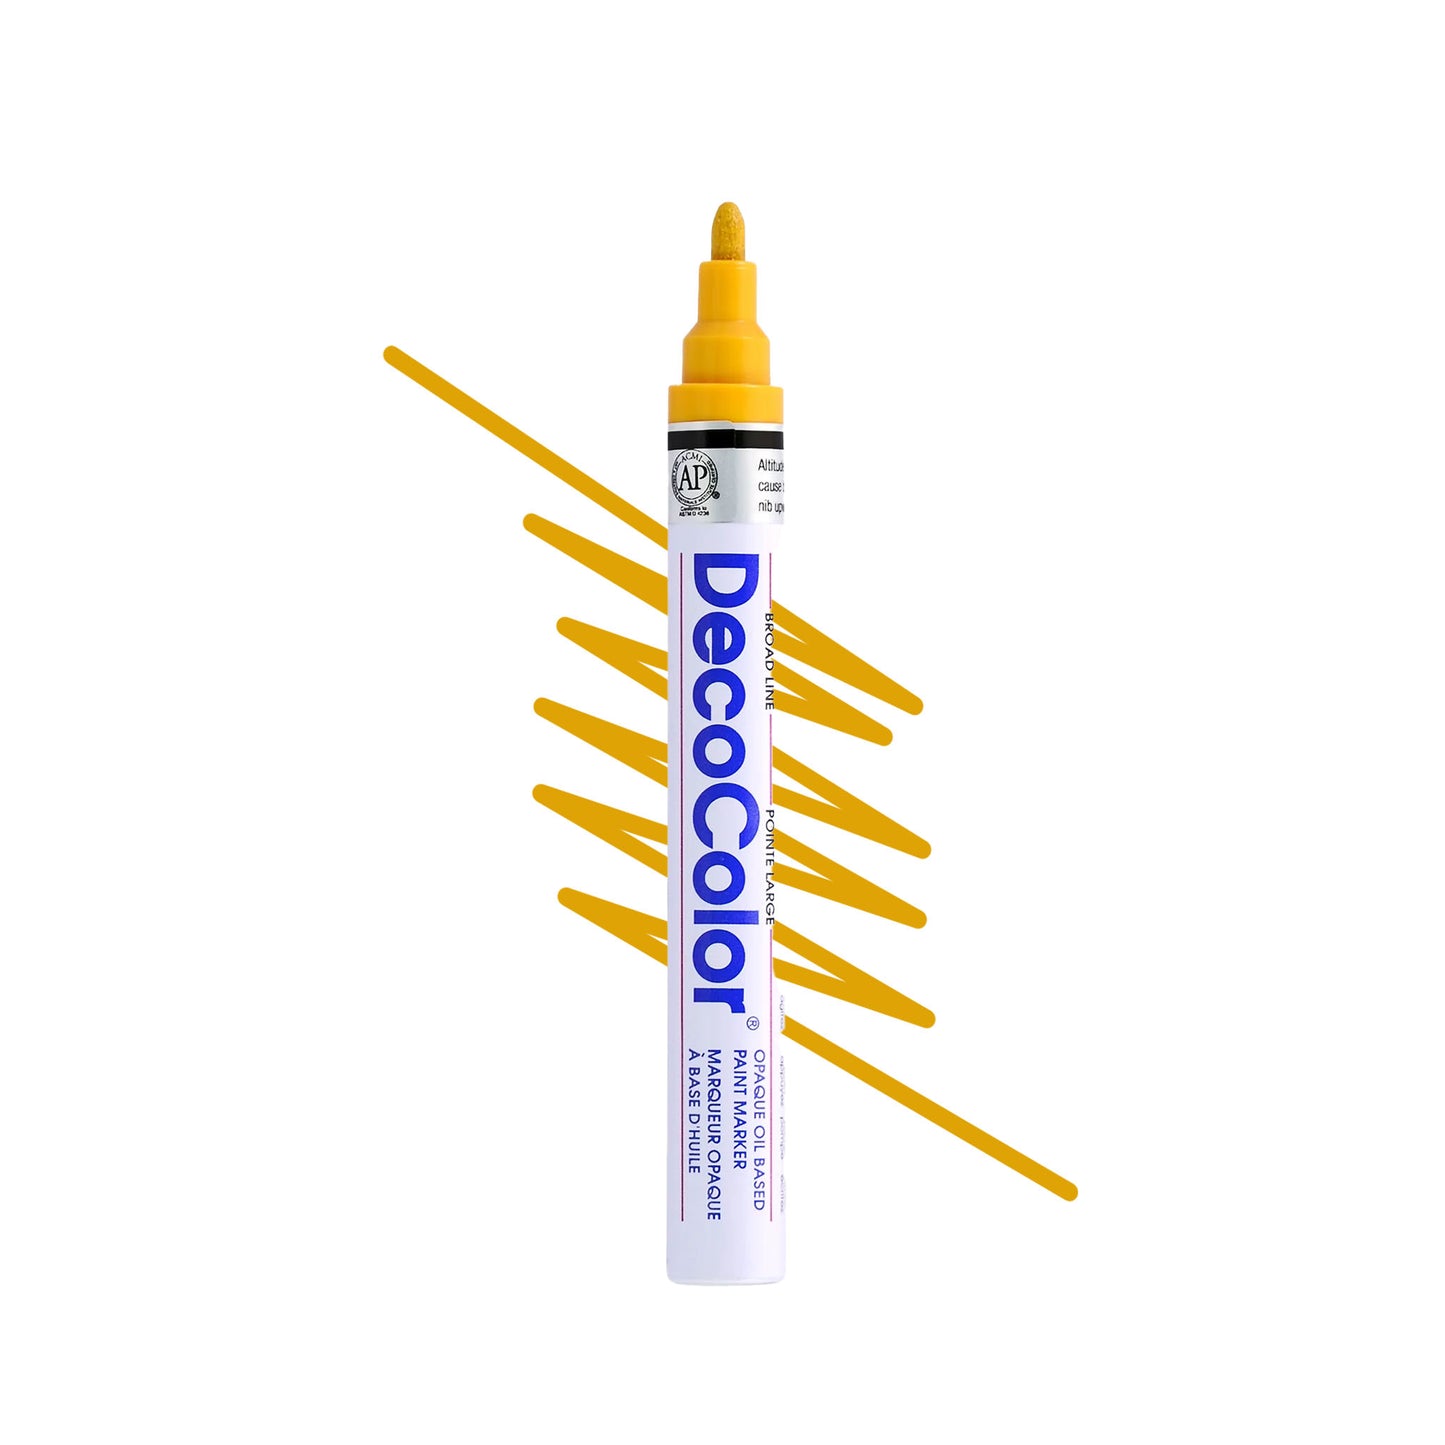 Deco Color artist paint markers in mustard yellow.